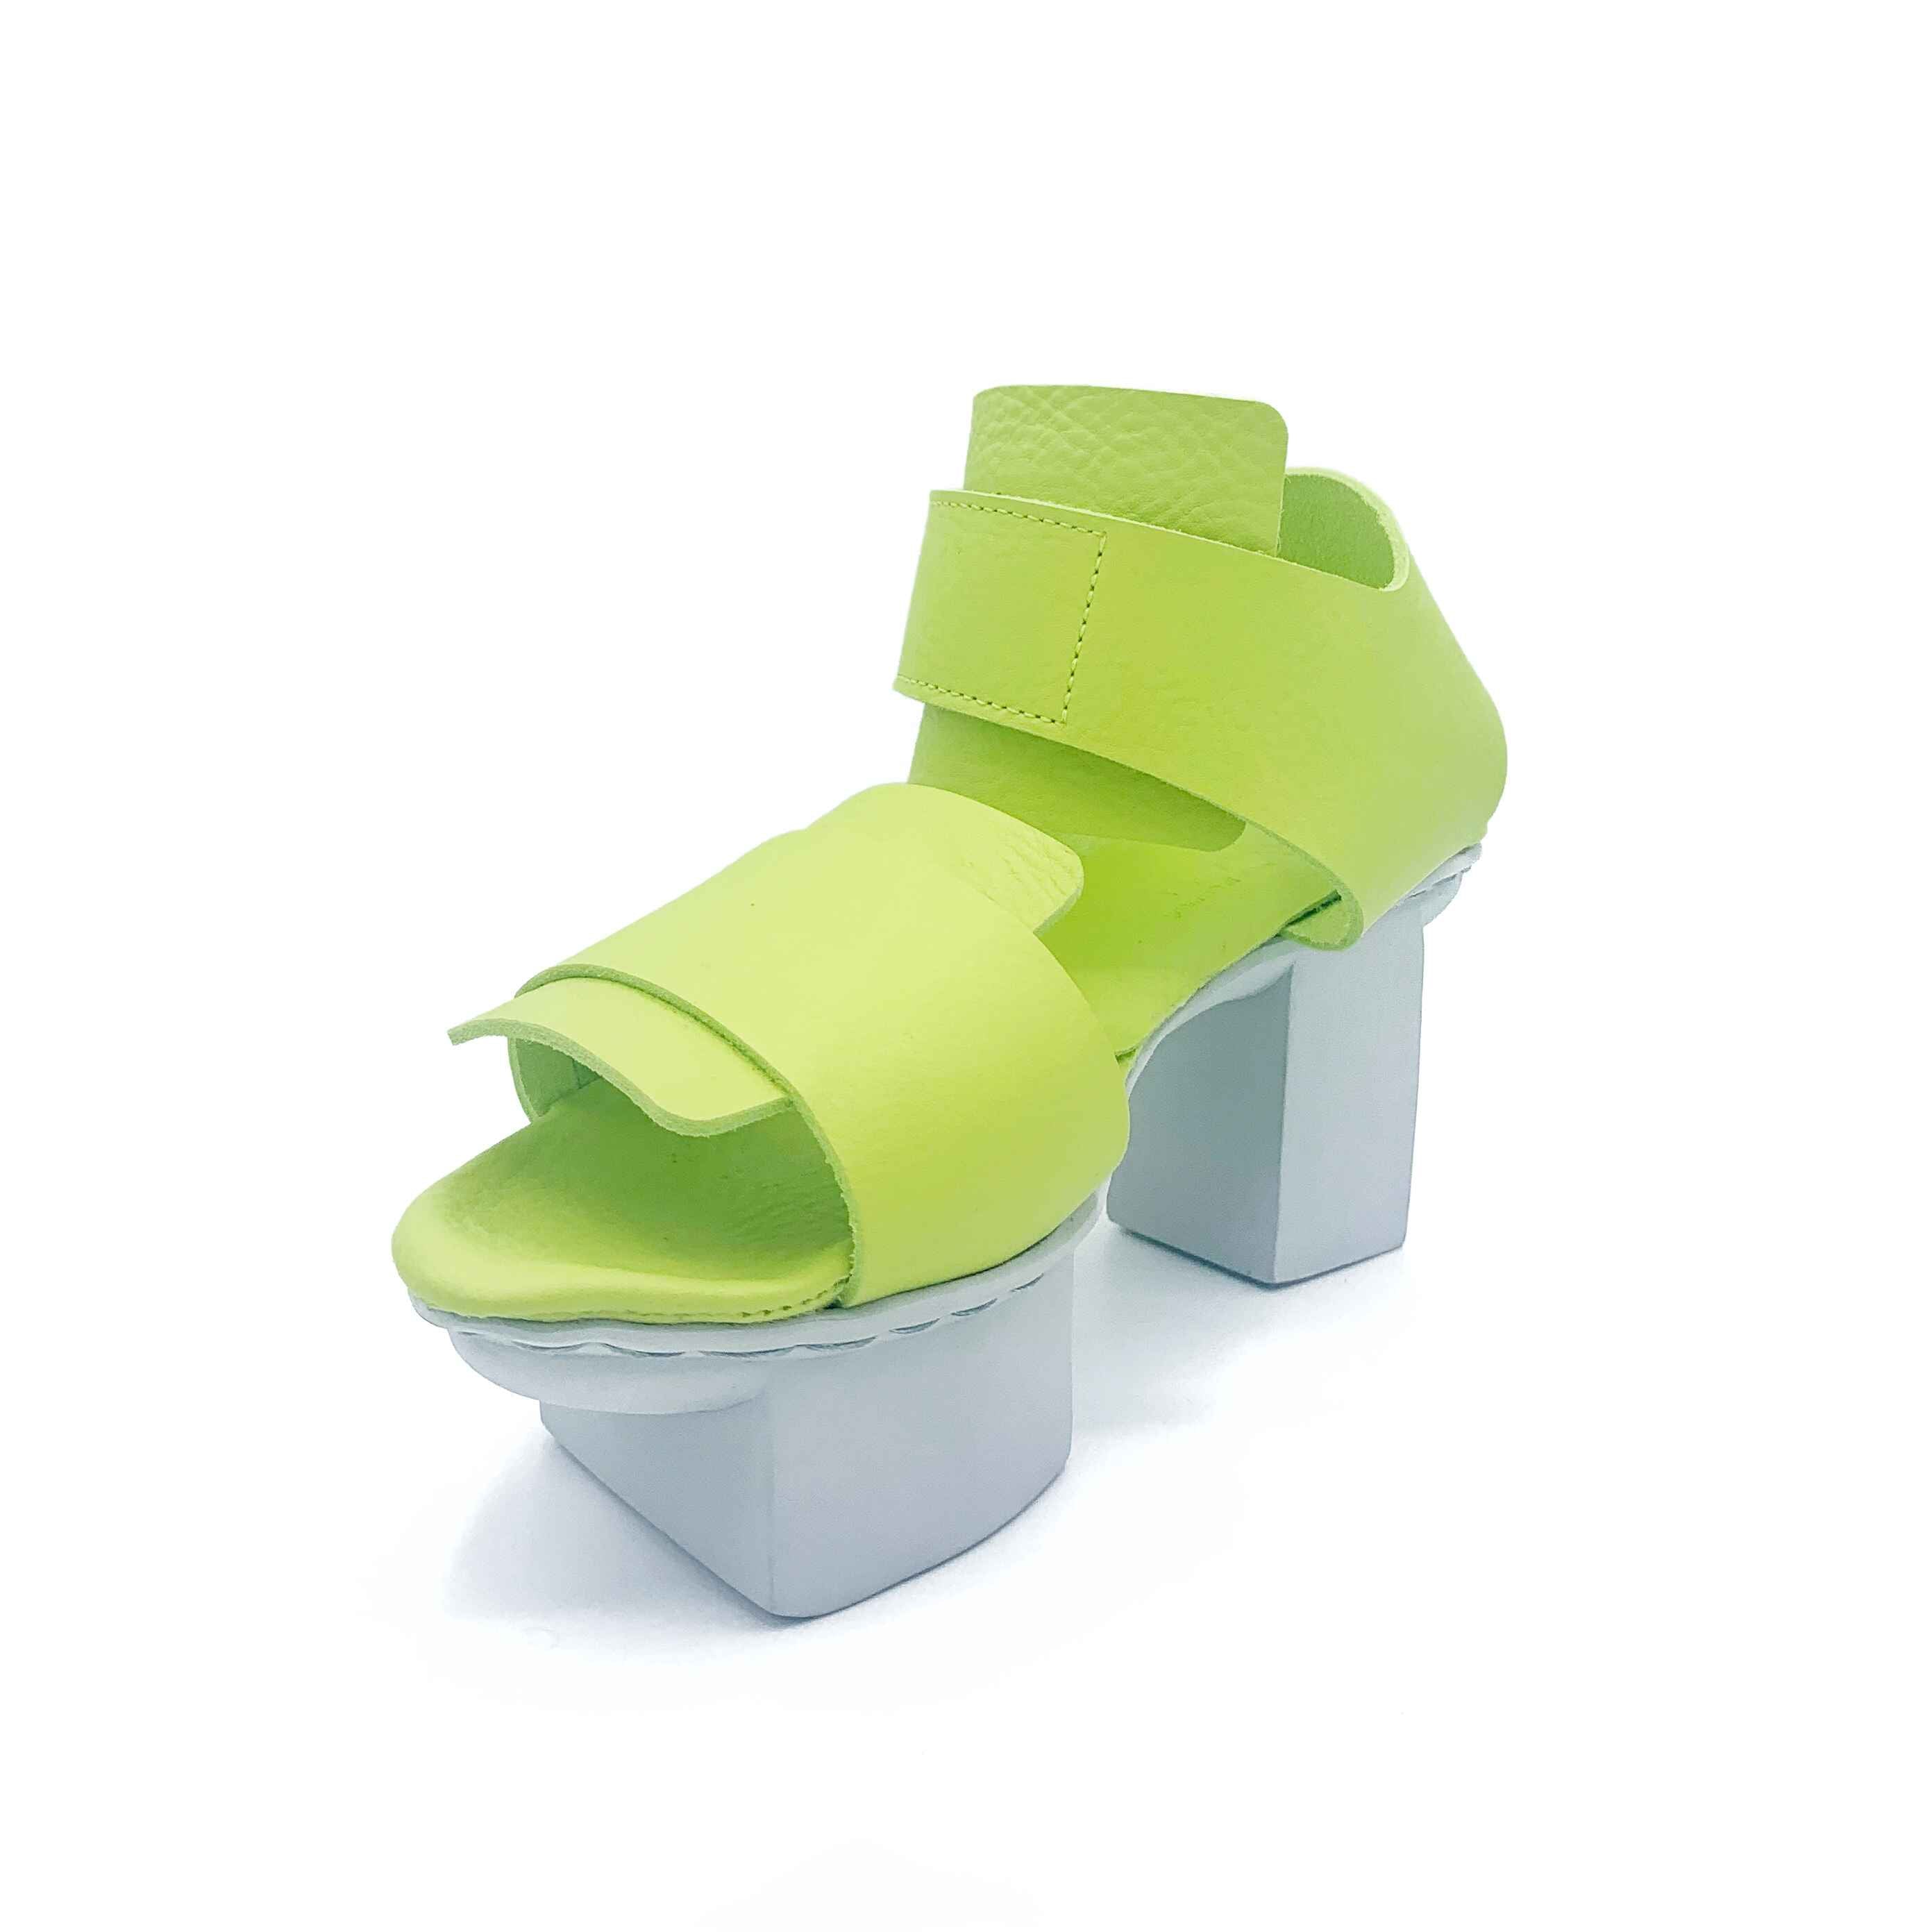 Inner front side view of the trippen visor shoe in the color lime with a white sole.